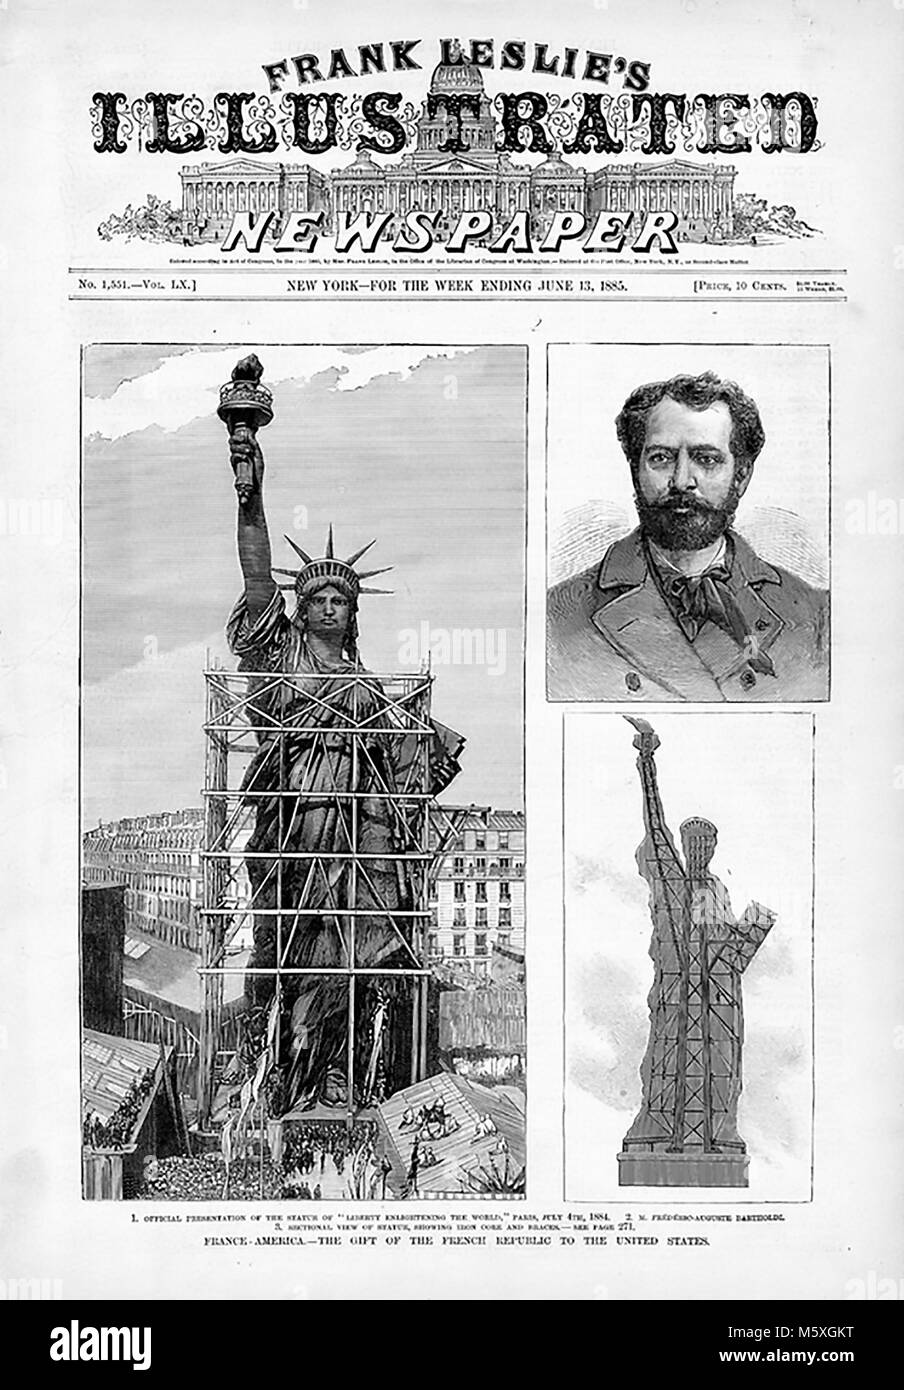 FREDERIC AUGUSTE BARTHOLDI (1834-1904) French sculptor who designed the Statue of Liberty shown under construction outside his Paris studio in this June 1885 American newspaper. Stock Photo